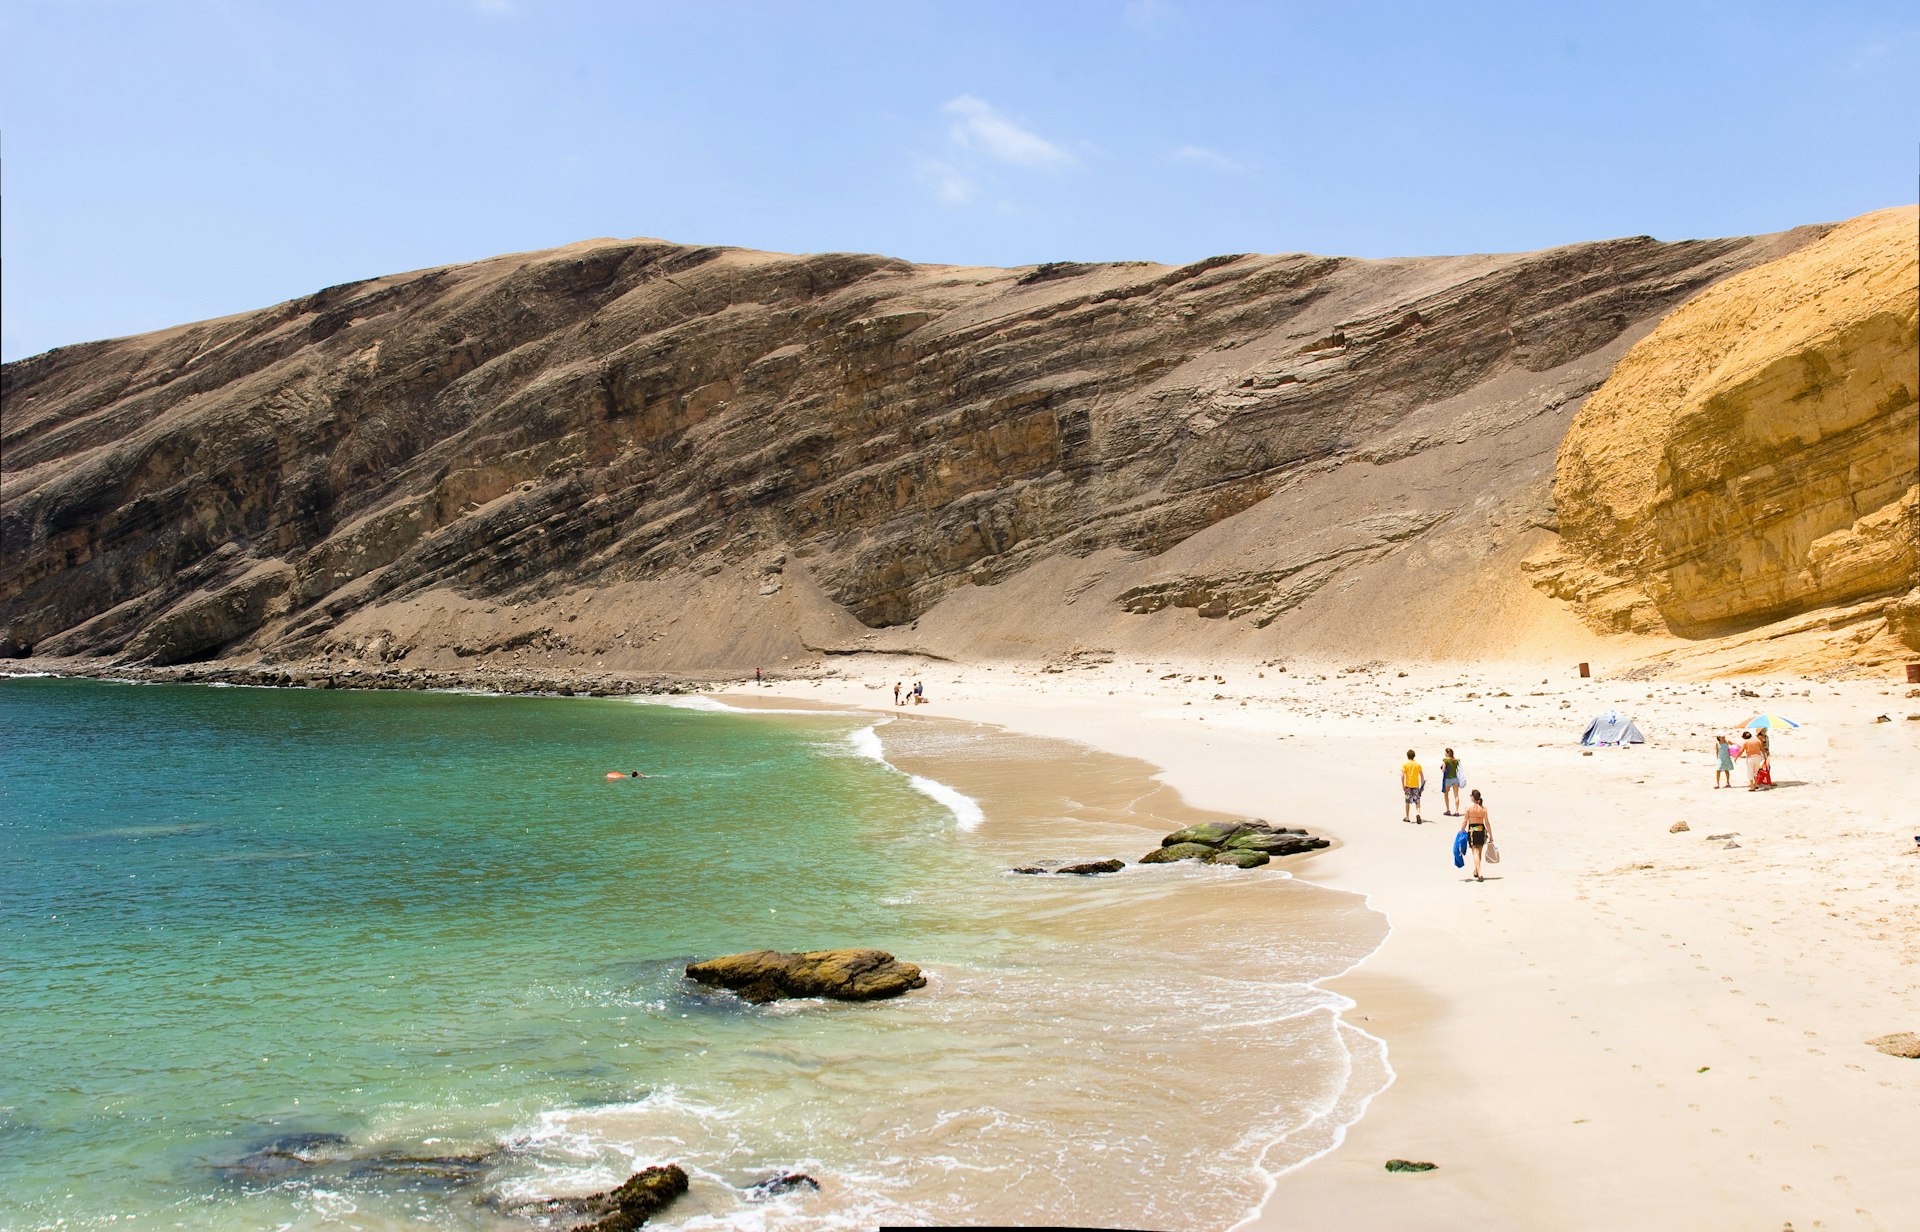 People walk along a stretch of sand backed by yellow cliffs and lapped by turquoise blue water at Paracas National Reserve 